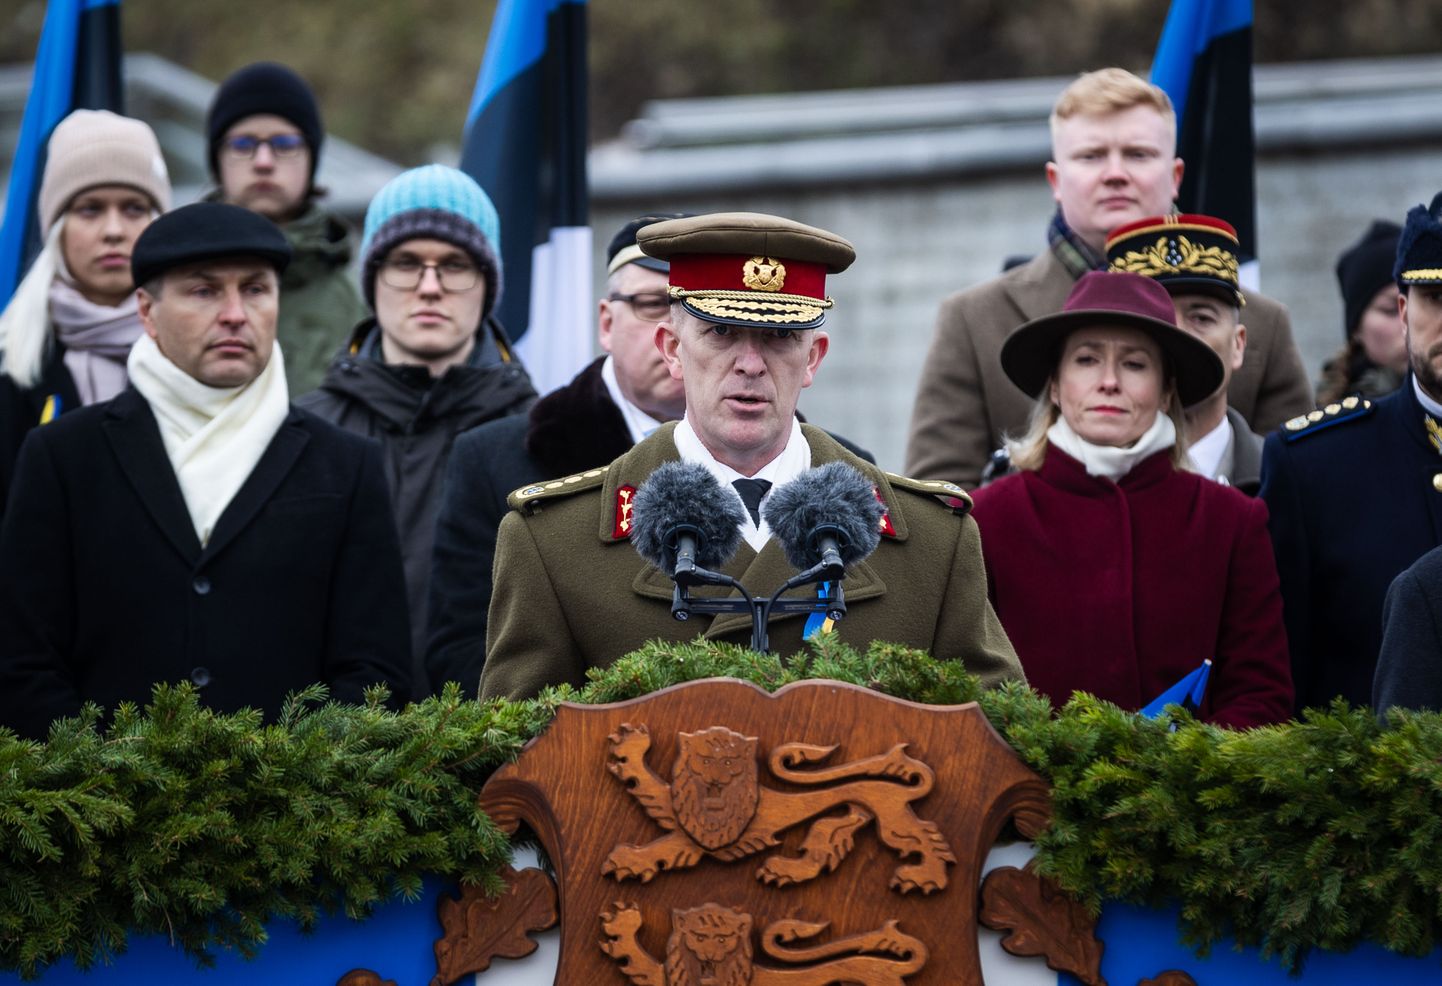 The commander of the Estonian defense forces, Martin Herem, said in his speech on the anniversary of the Republic of Estonia on Saturday that without values, Estonia would not be free.